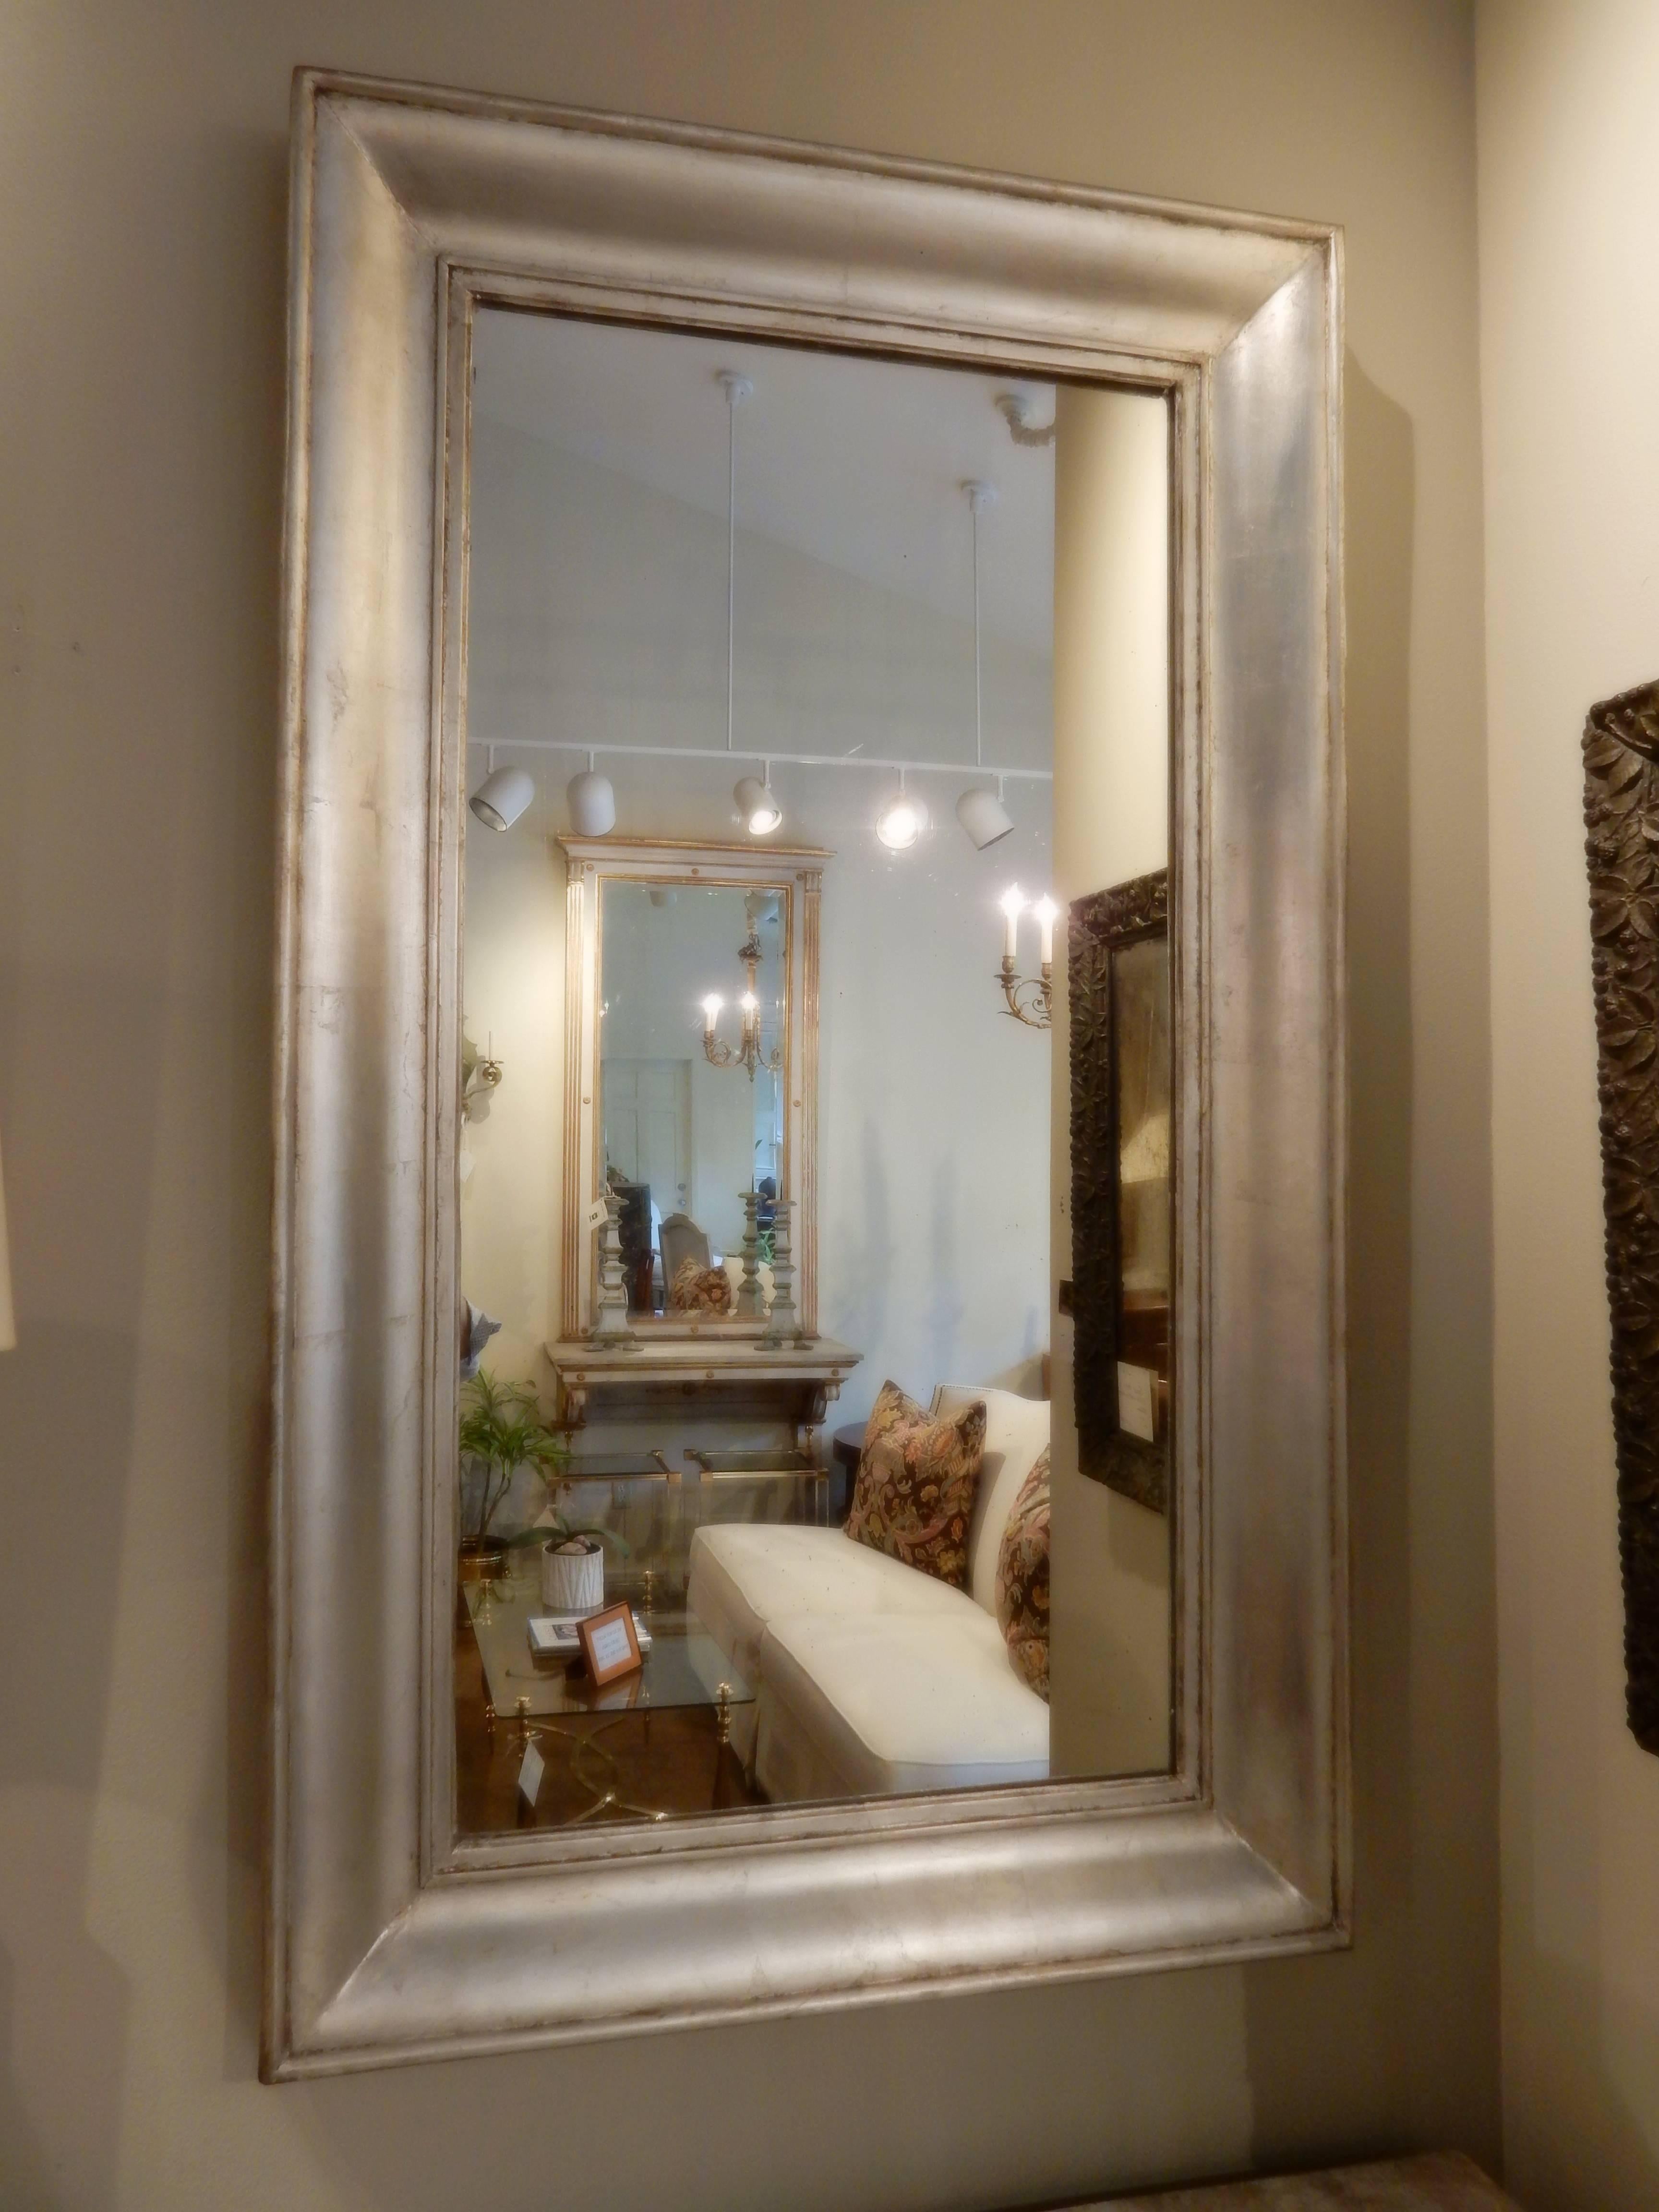 Pair of silver leaf 19th century French mirrors with original glass. They are identical except one mirror is 3/4